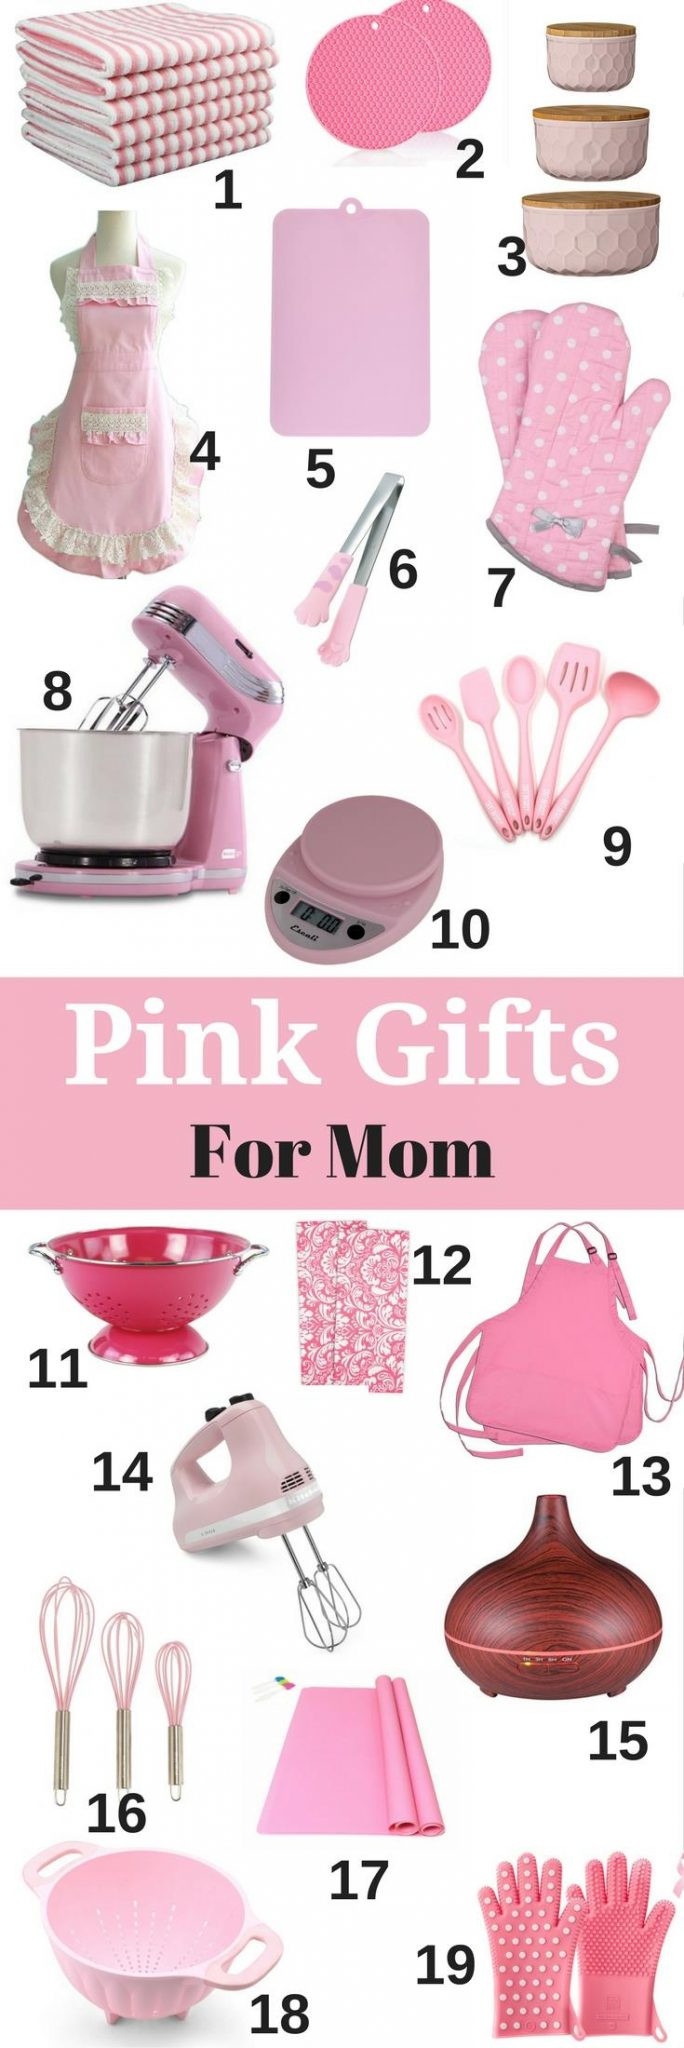 Best Gift Ideas For Mom
 Pink Gifts for Mom the Best Gift Ideas for Mother s Day